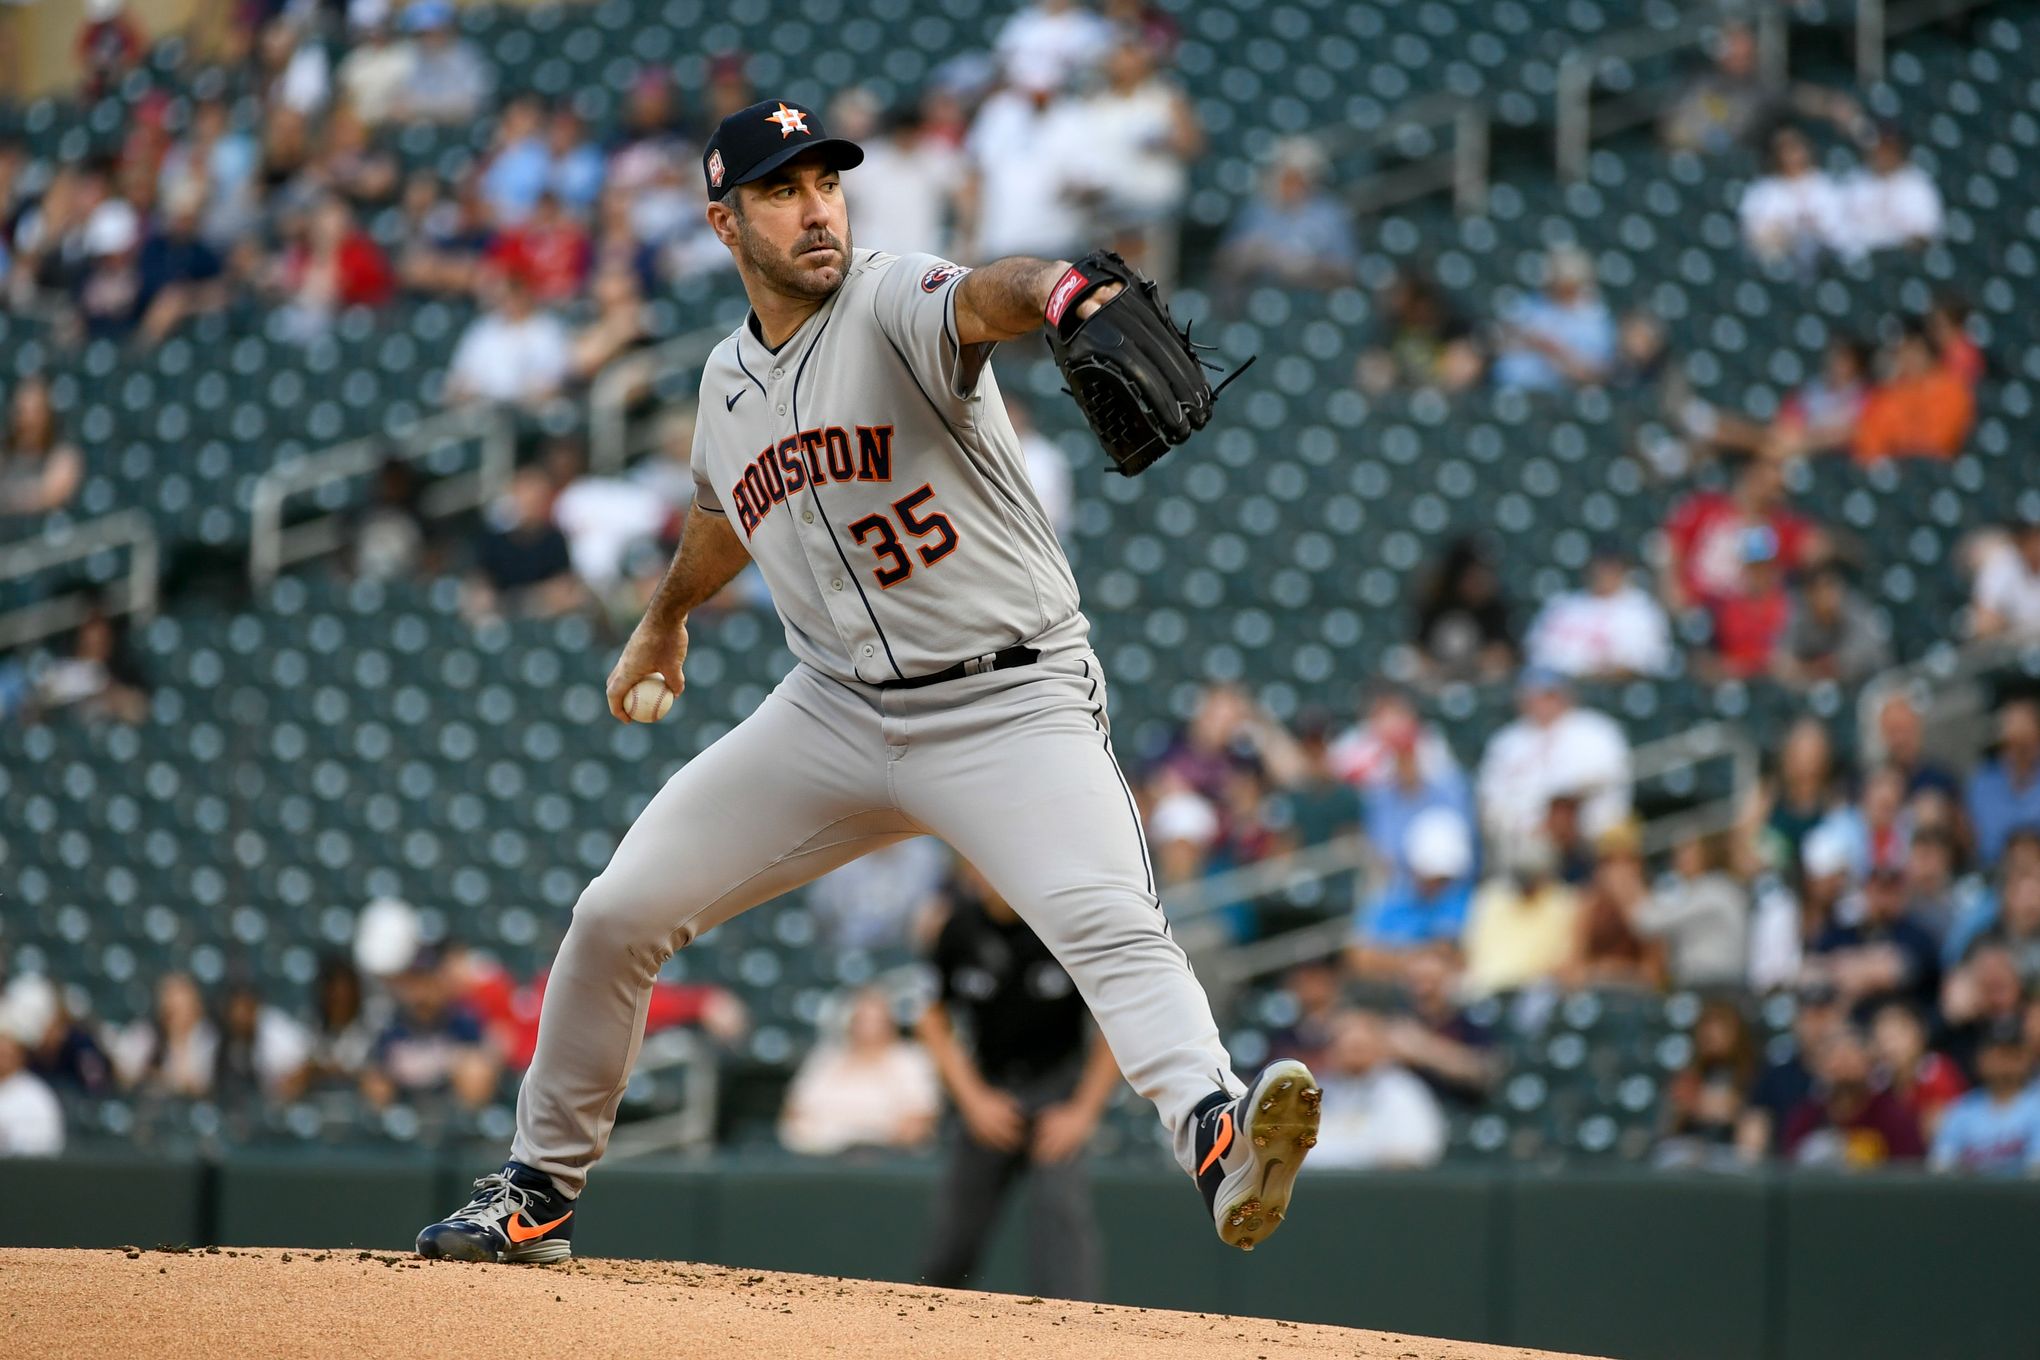 Astros lose ace pitcher to Tommy John surgery